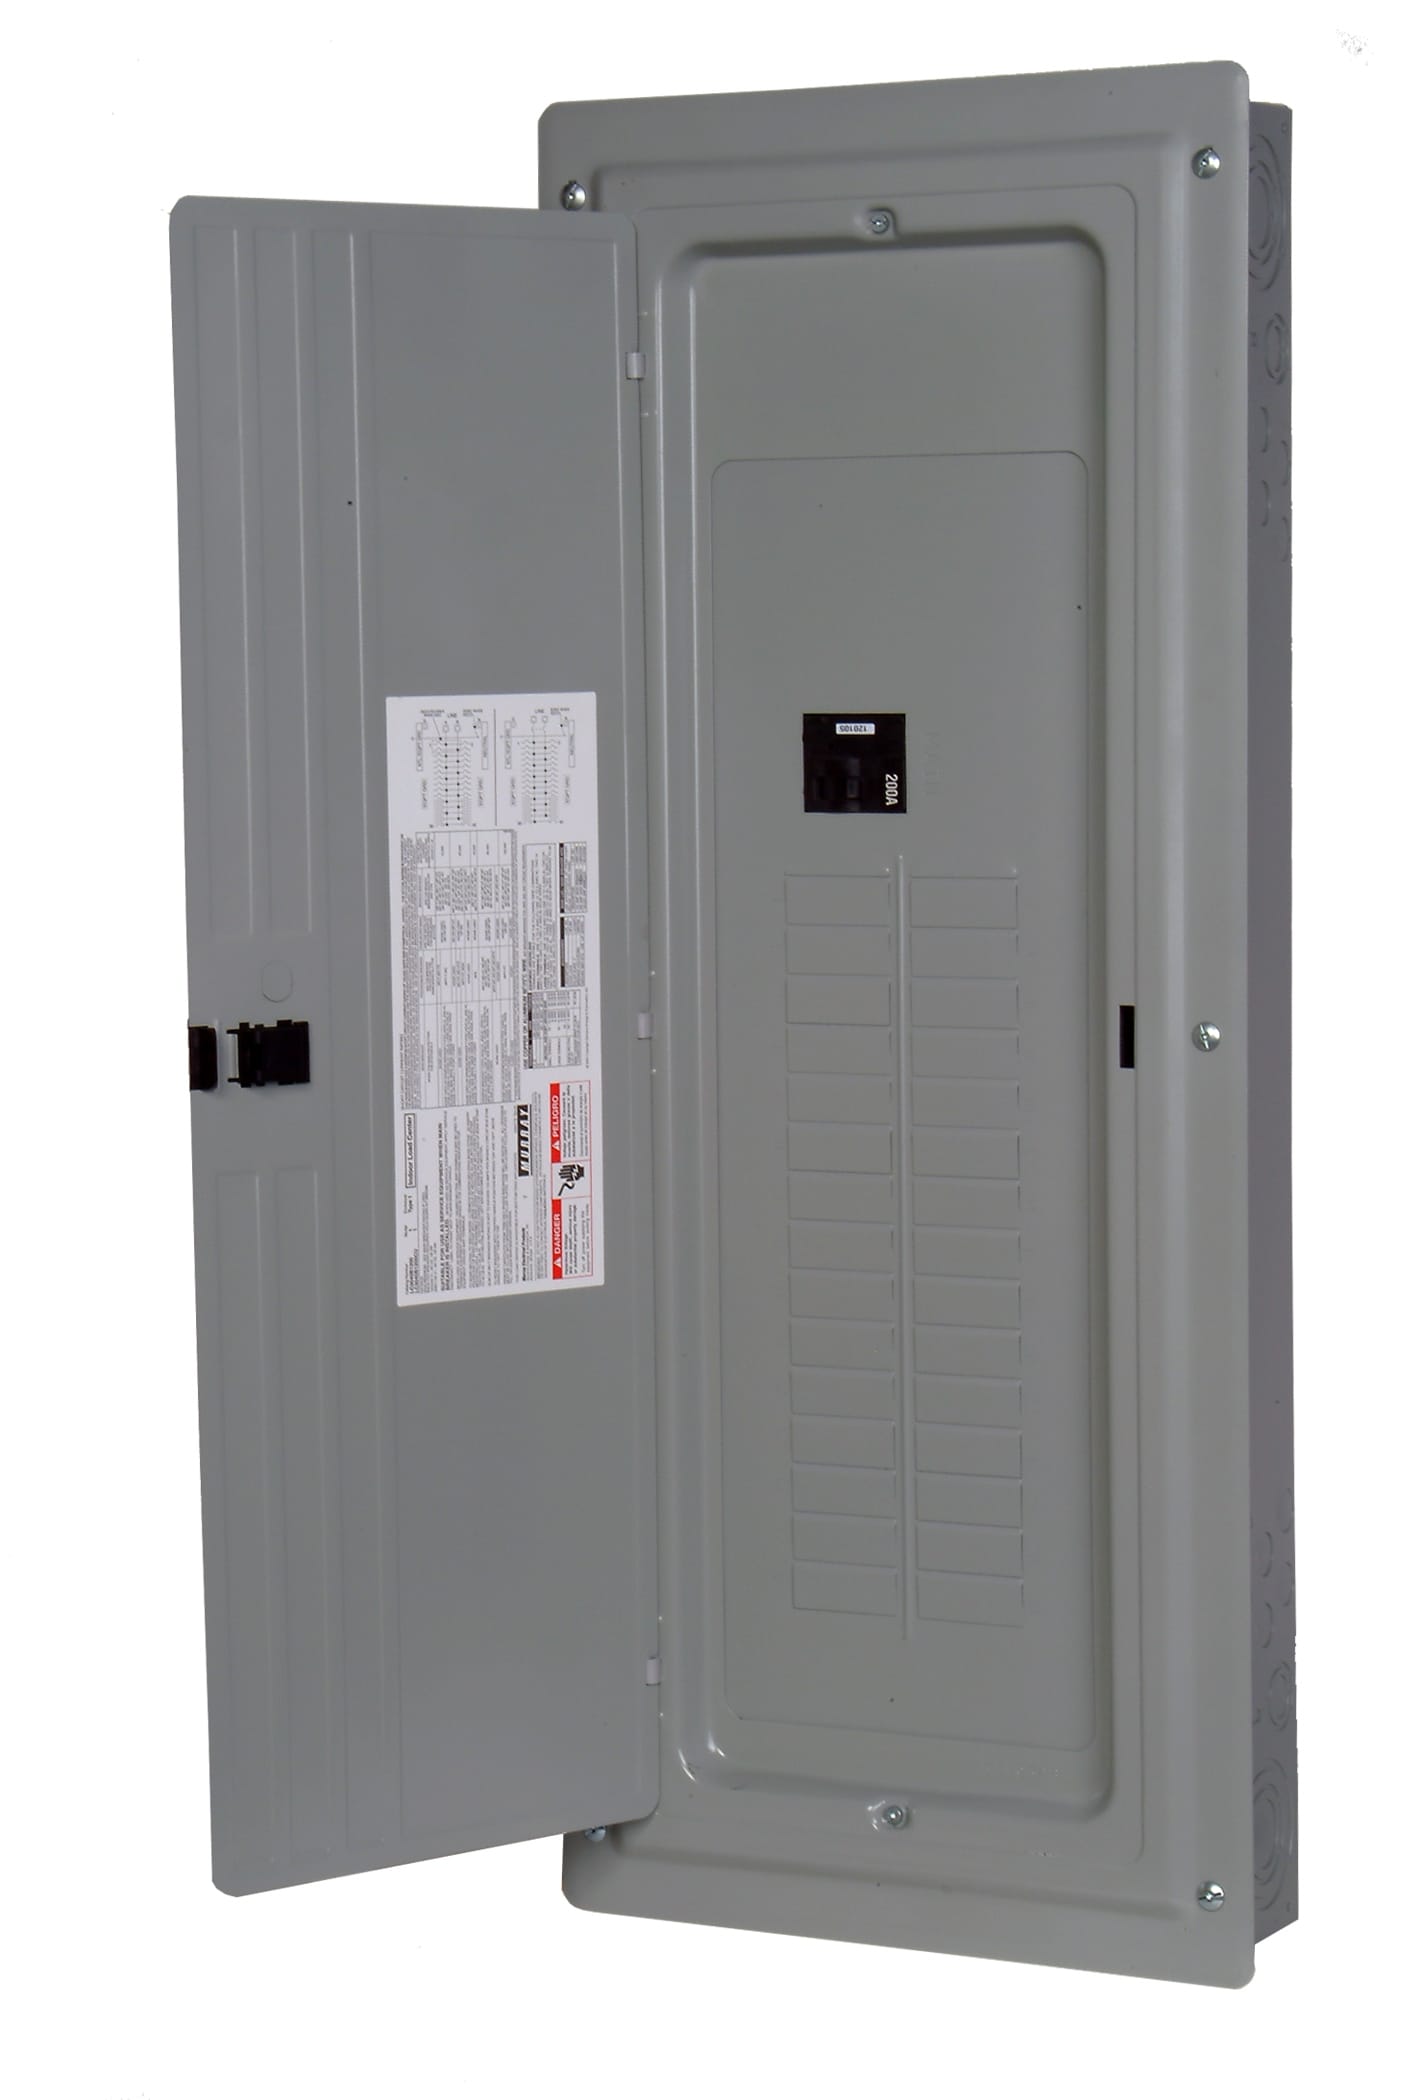 Siemens Electrical Panel Cover Replacement inspire ideas